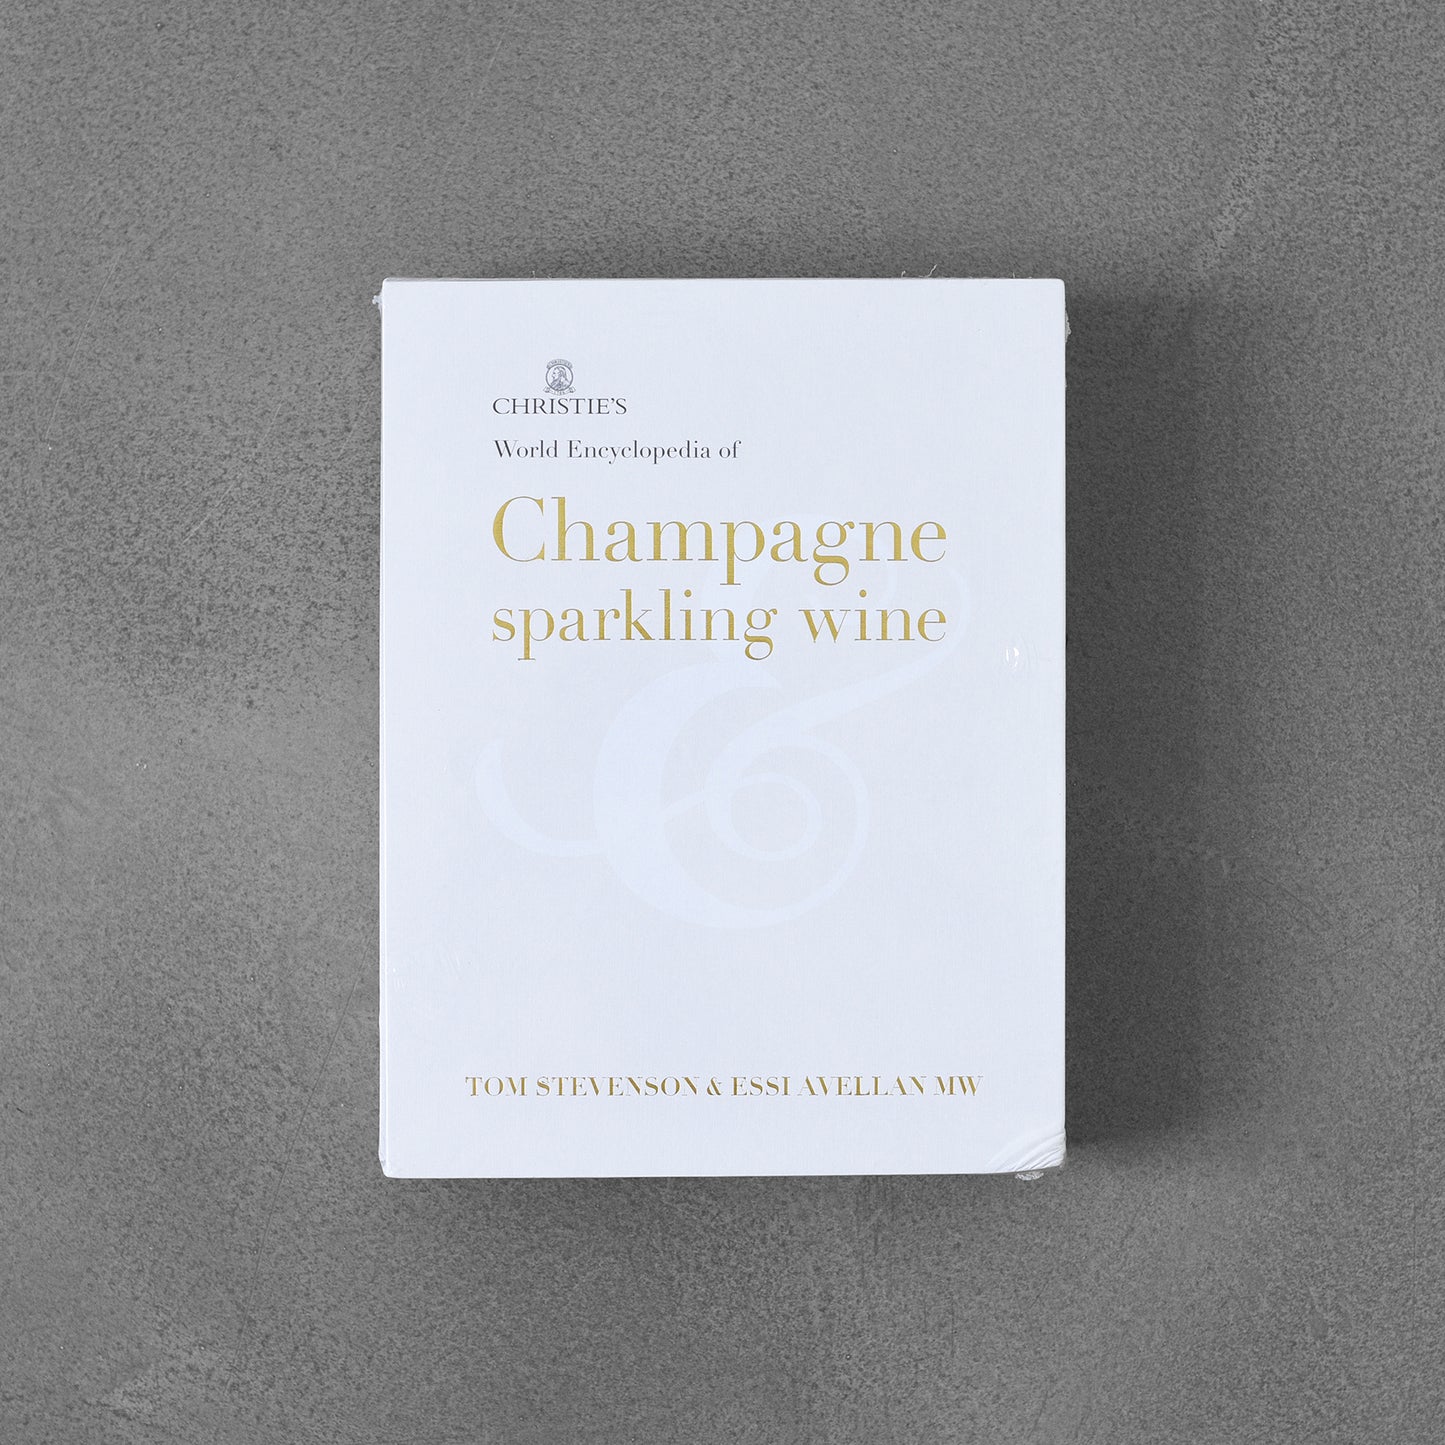 Christie's World Encyclopedia of Champagne Sparkling Wine